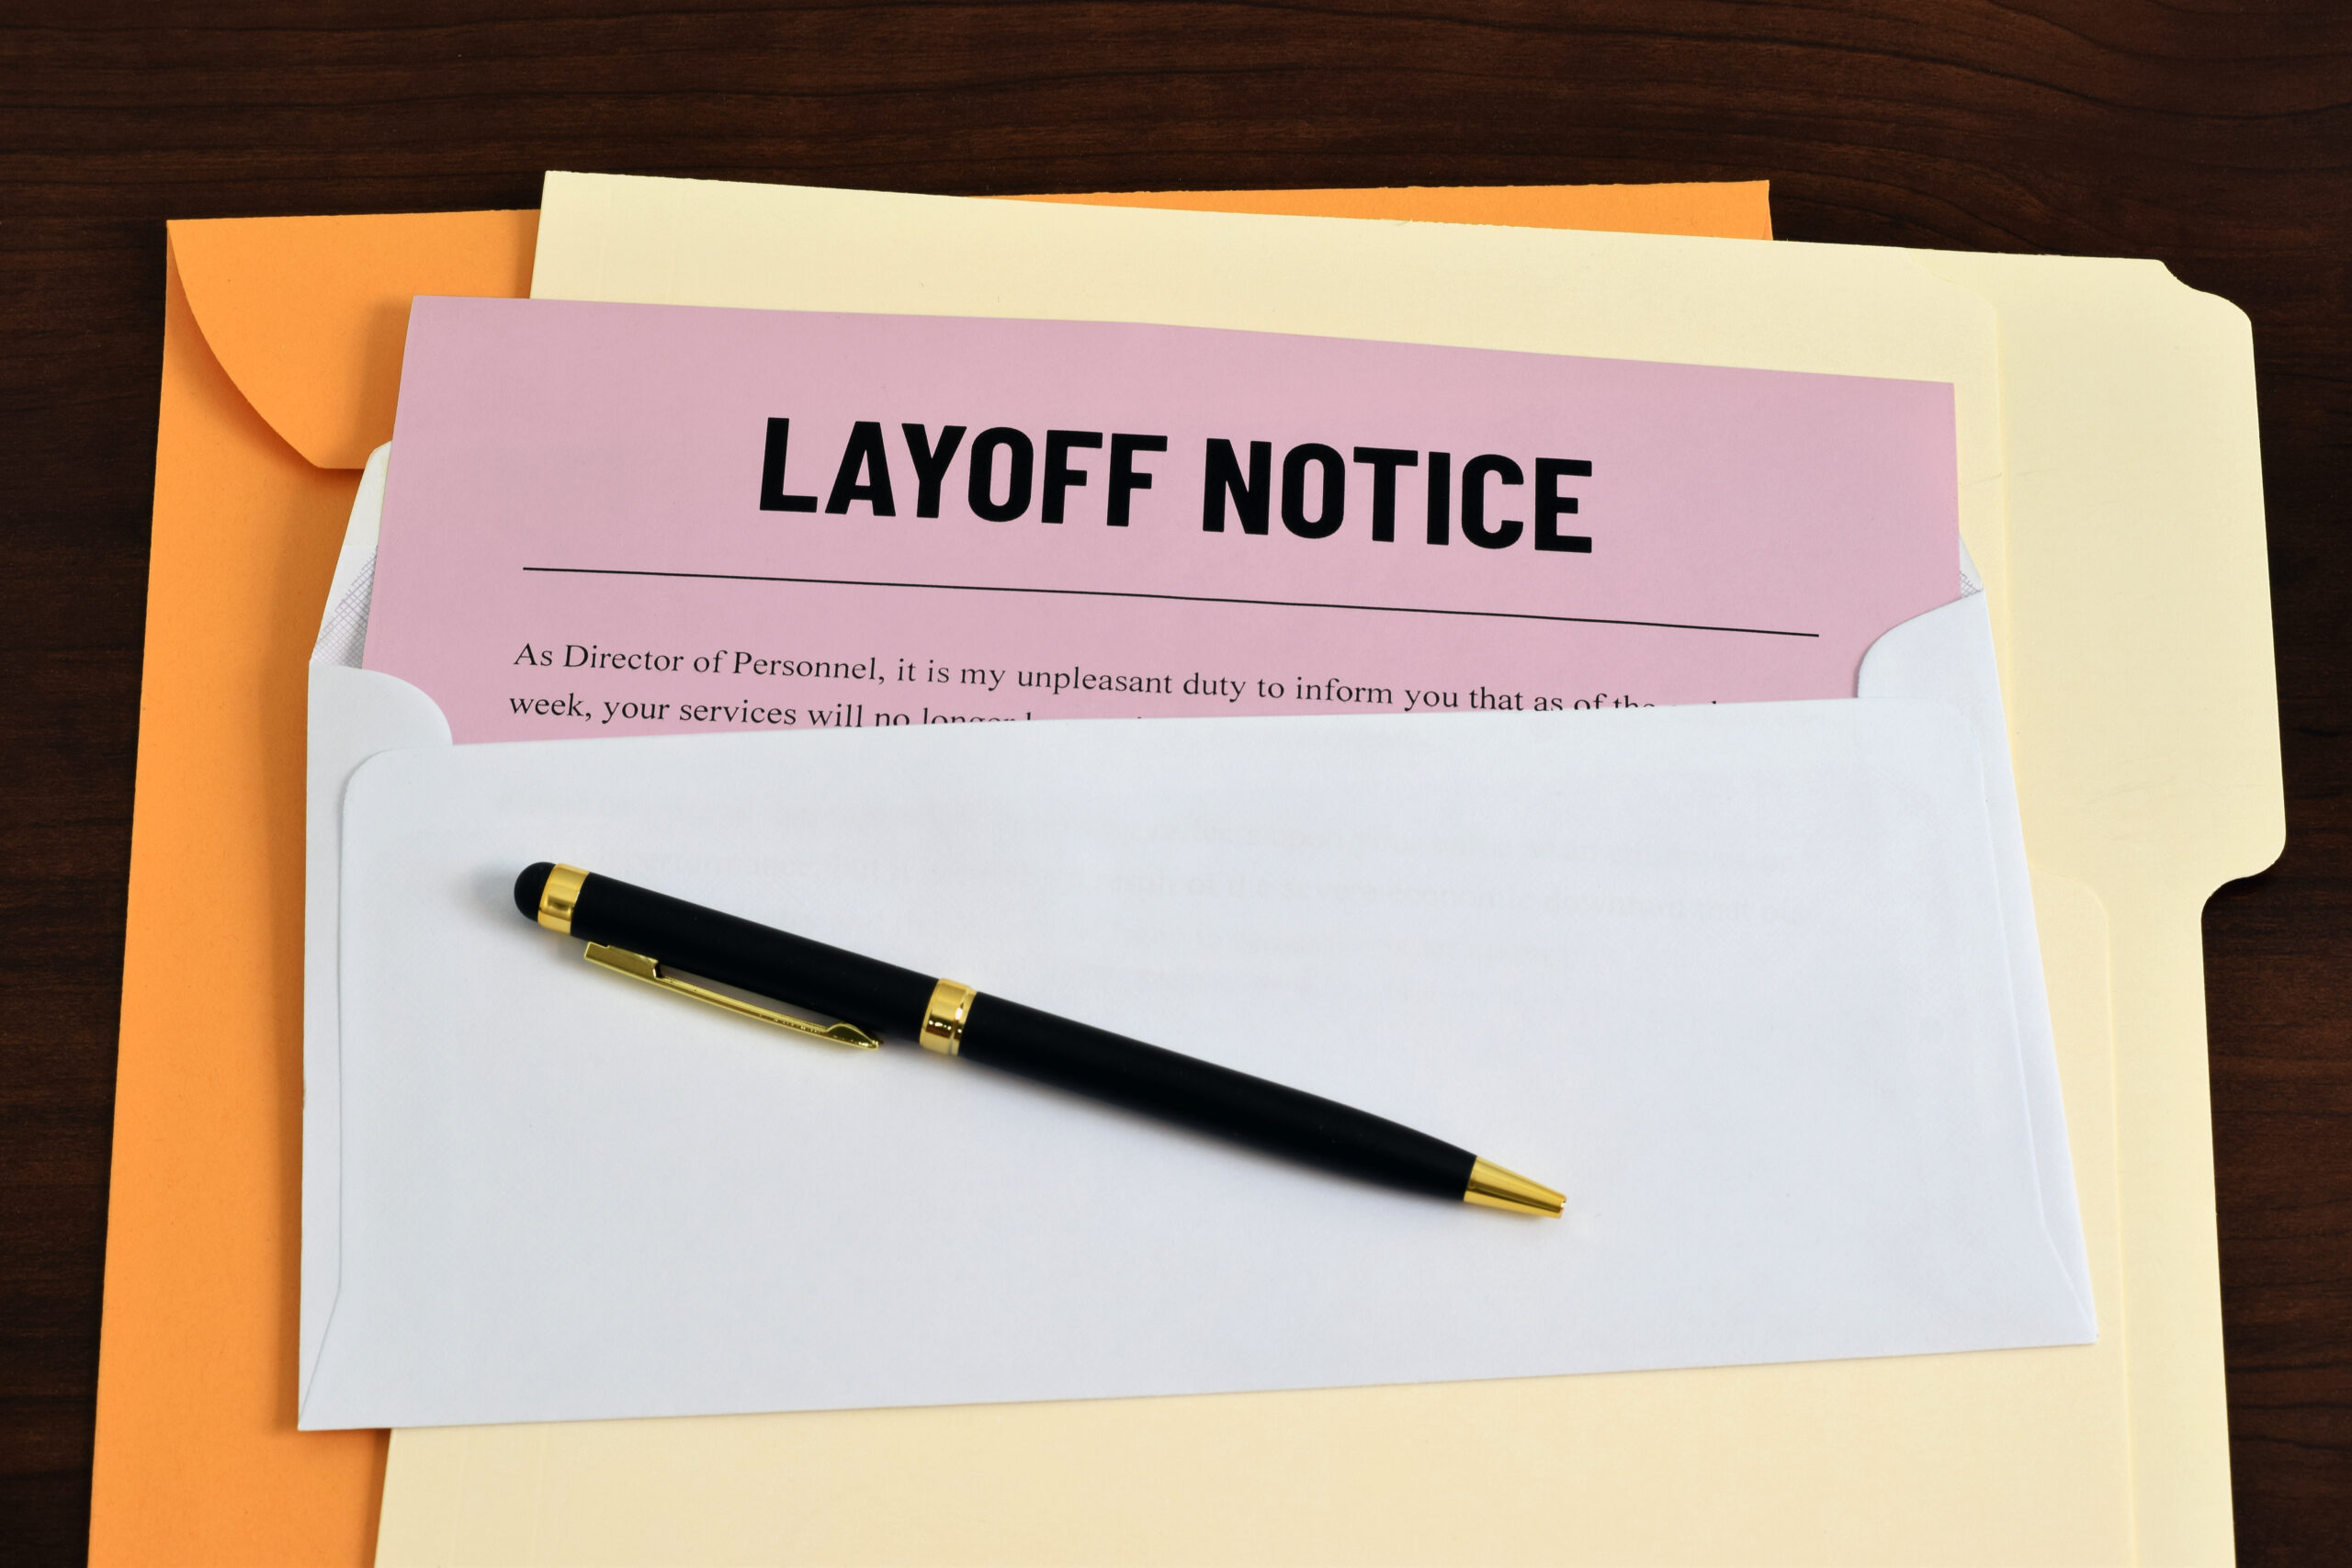 NimoHR | Crafting a Layoff Notice: Effective Communication During Work Shortages